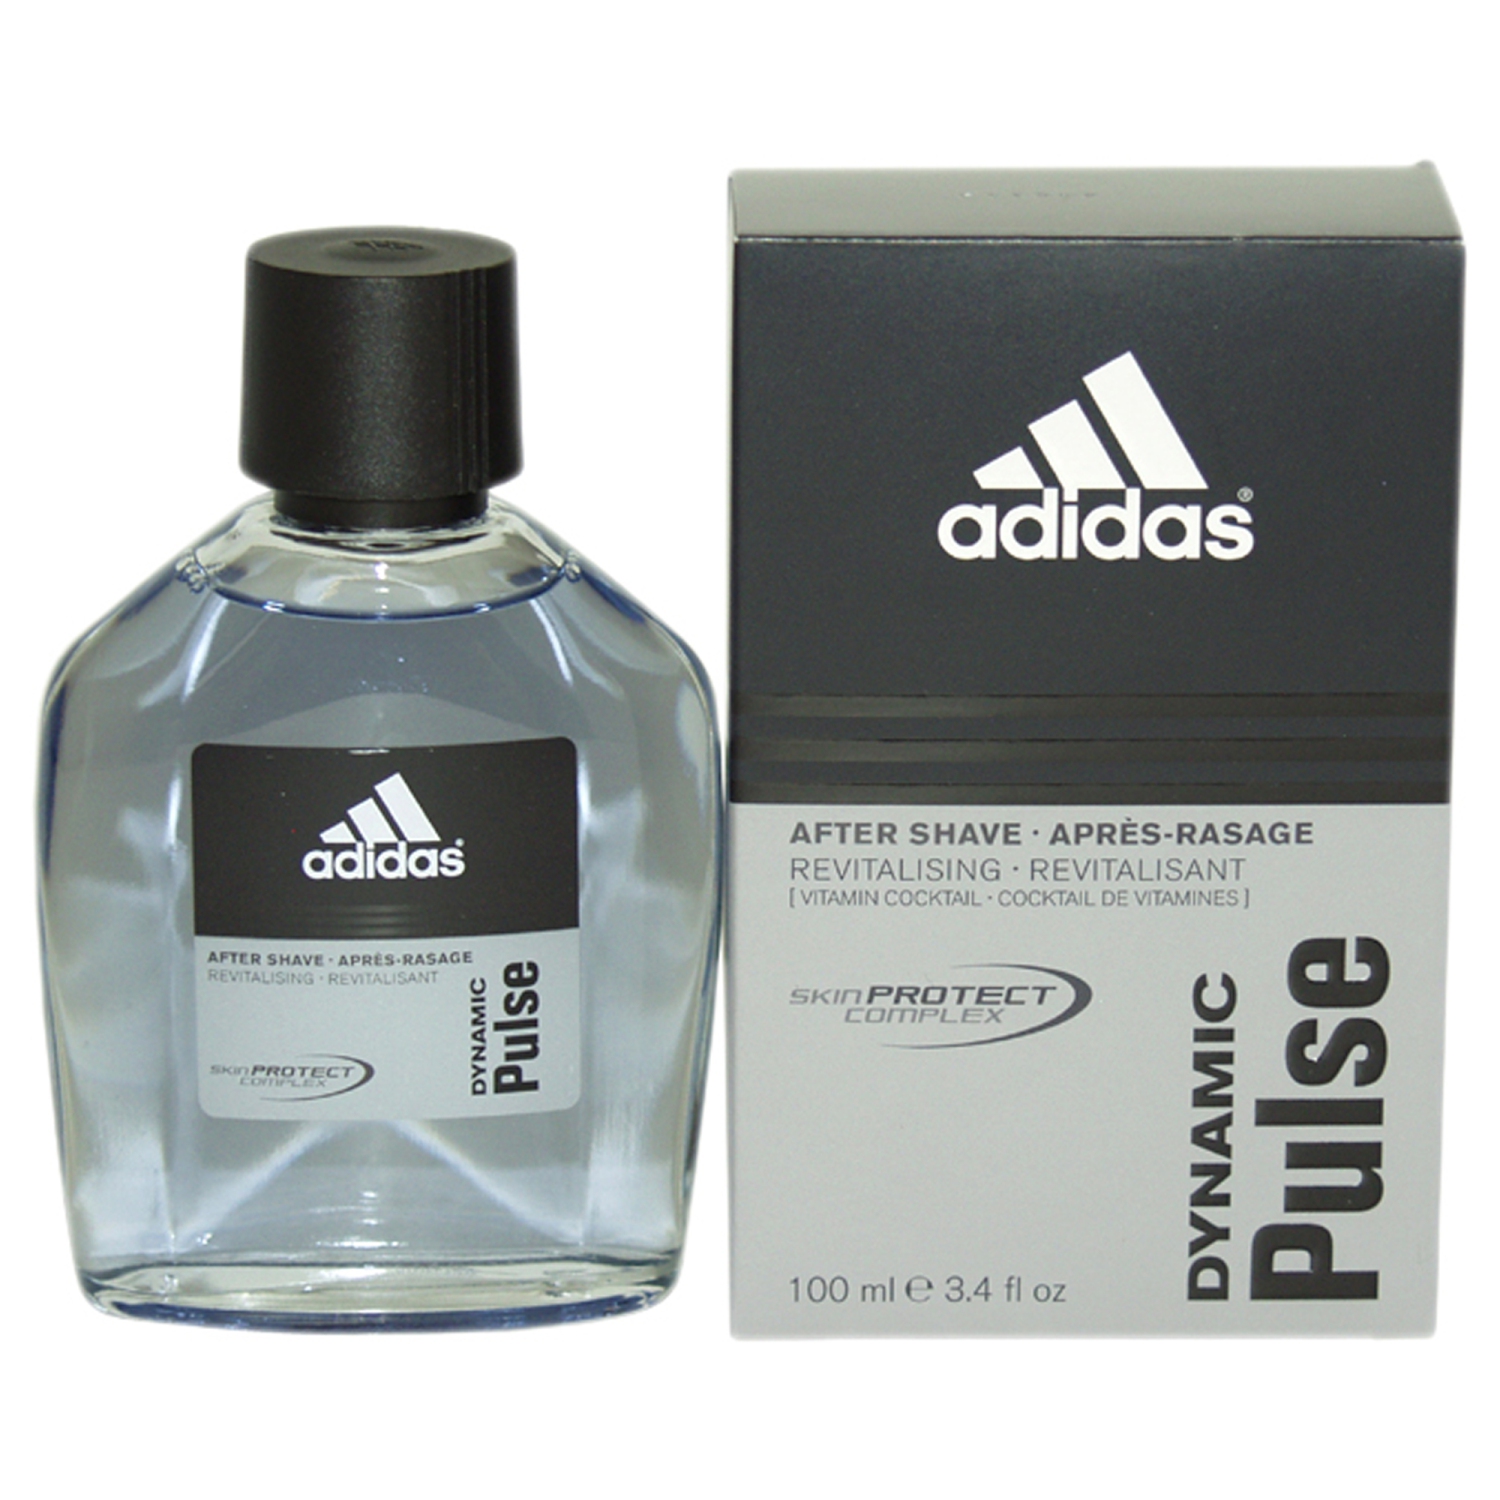 Adidas Dynamic Pulse by Adidas for Men - 3.4 oz Aftershave